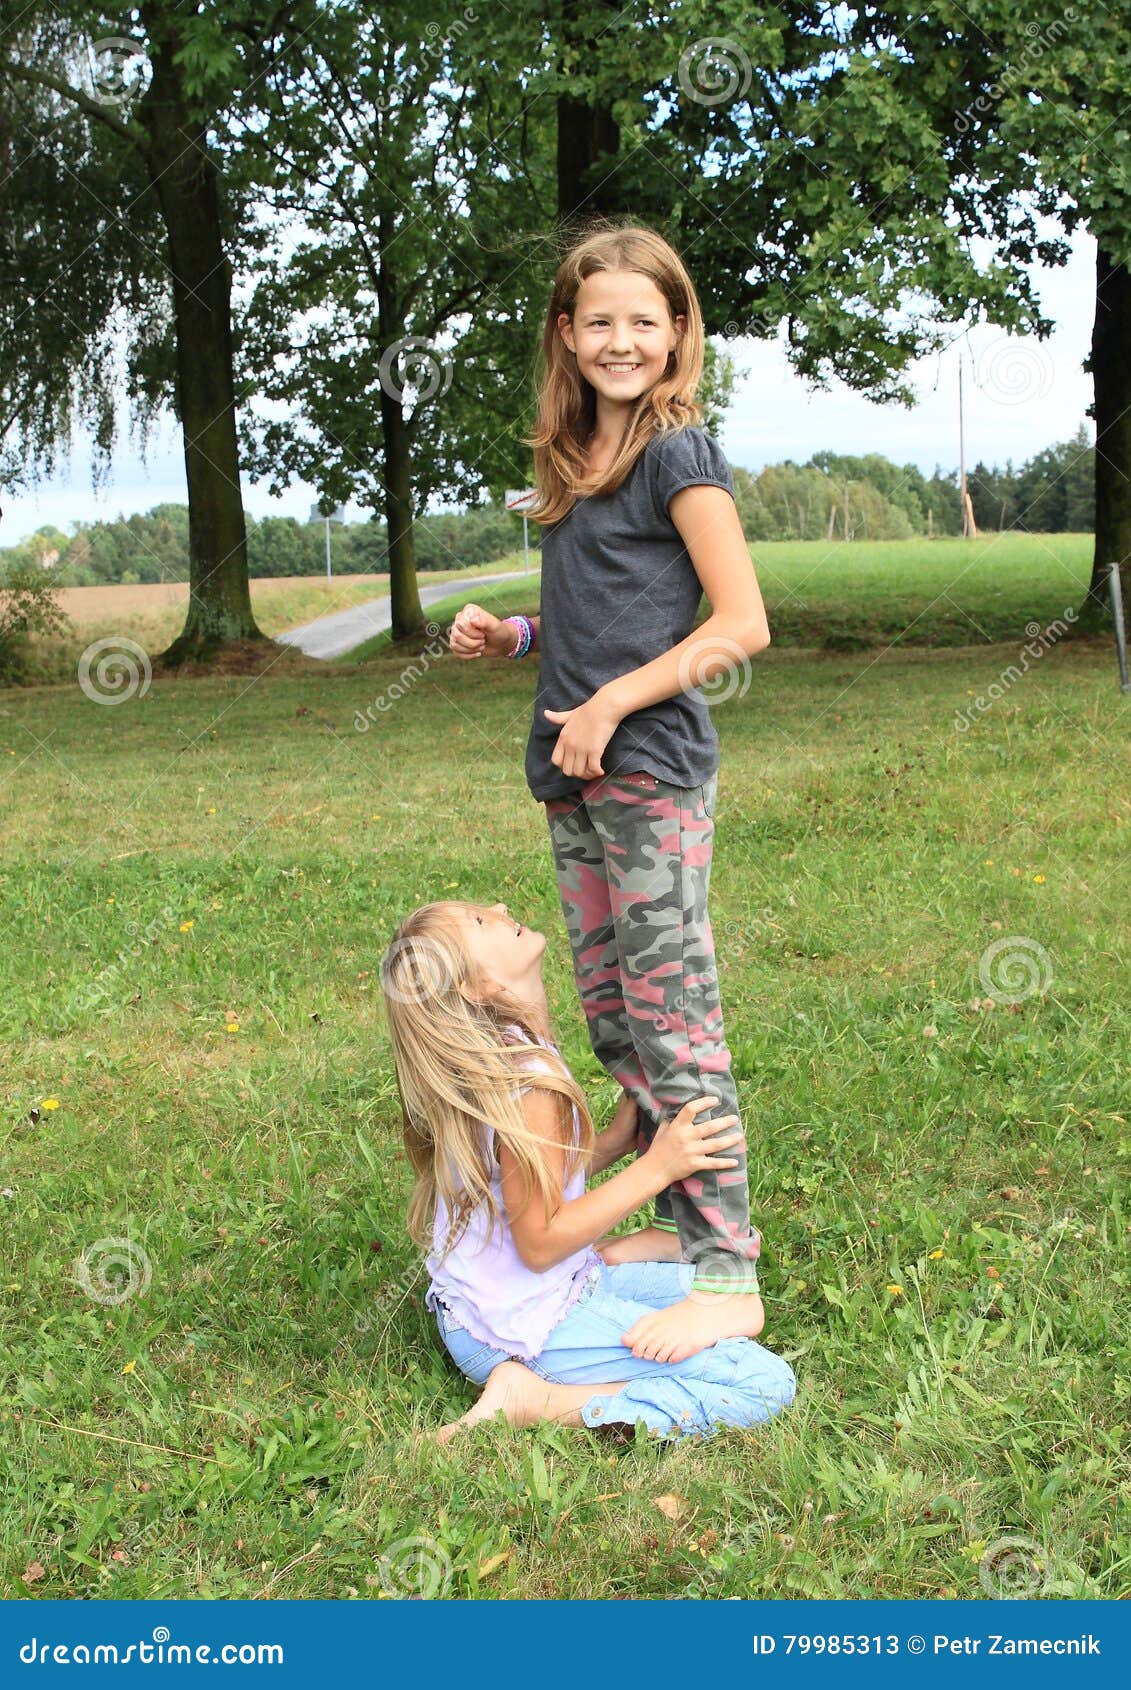 girls playing with each other